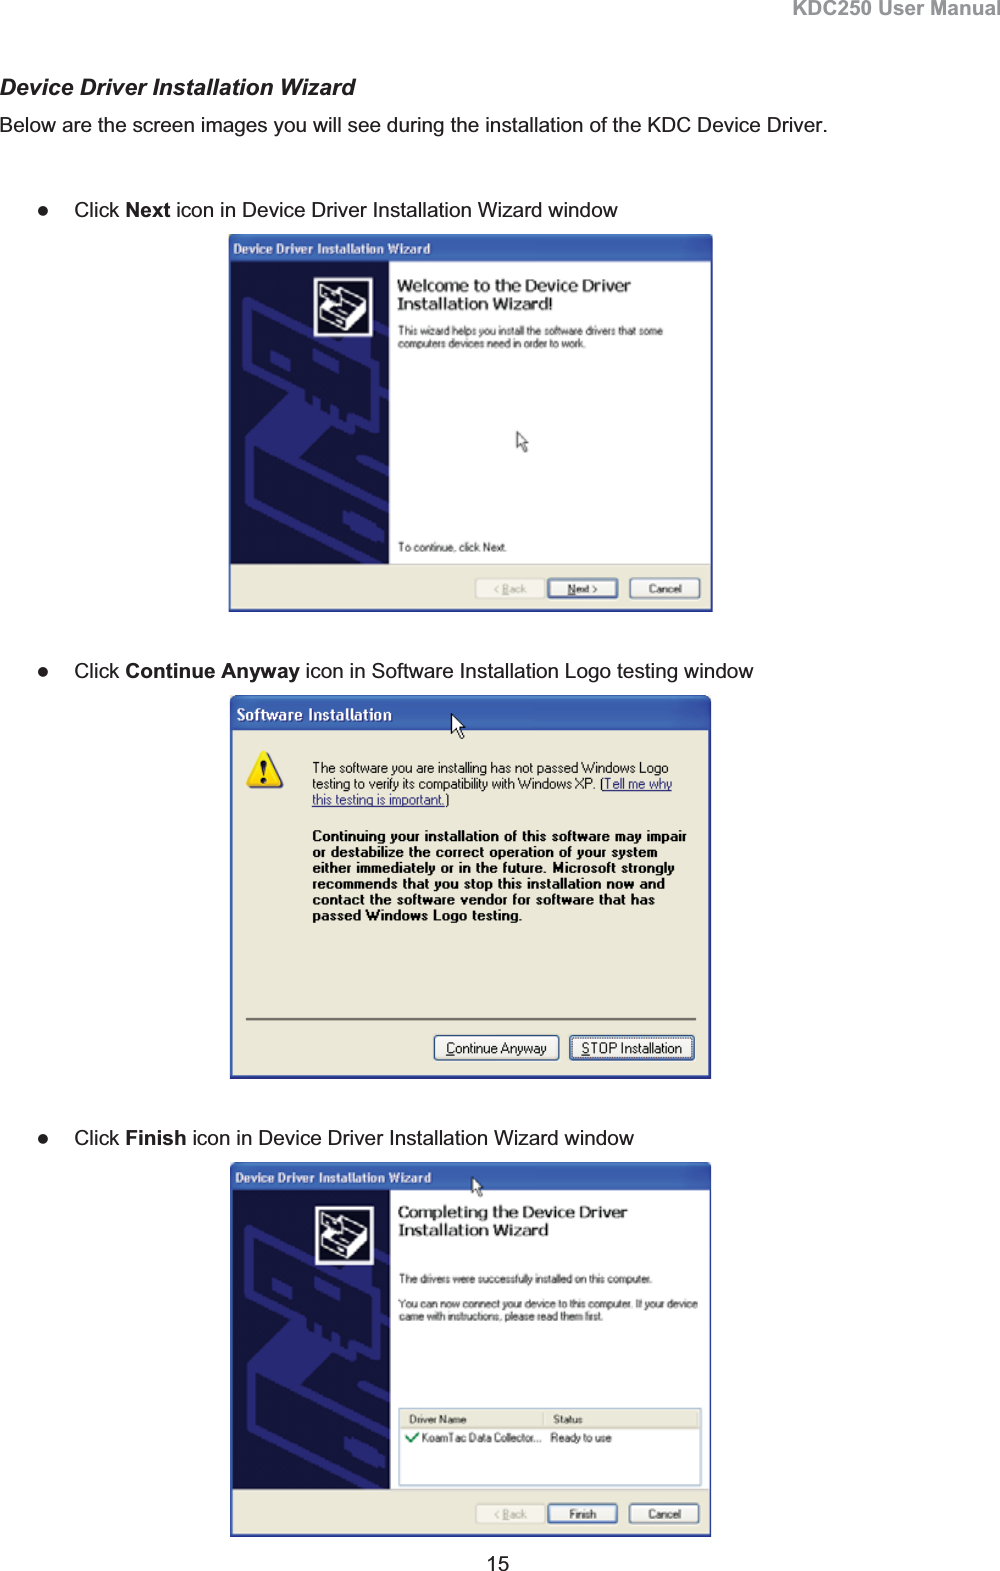 KDC250 User Manual 15 Device Driver Installation Wizard Below are the screen images you will see during the installation of the KDC Device Driver.   zClick Next icon in Device Driver Installation Wizard window zClick Continue Anyway icon in Software Installation Logo testing window zClick Finish icon in Device Driver Installation Wizard window 